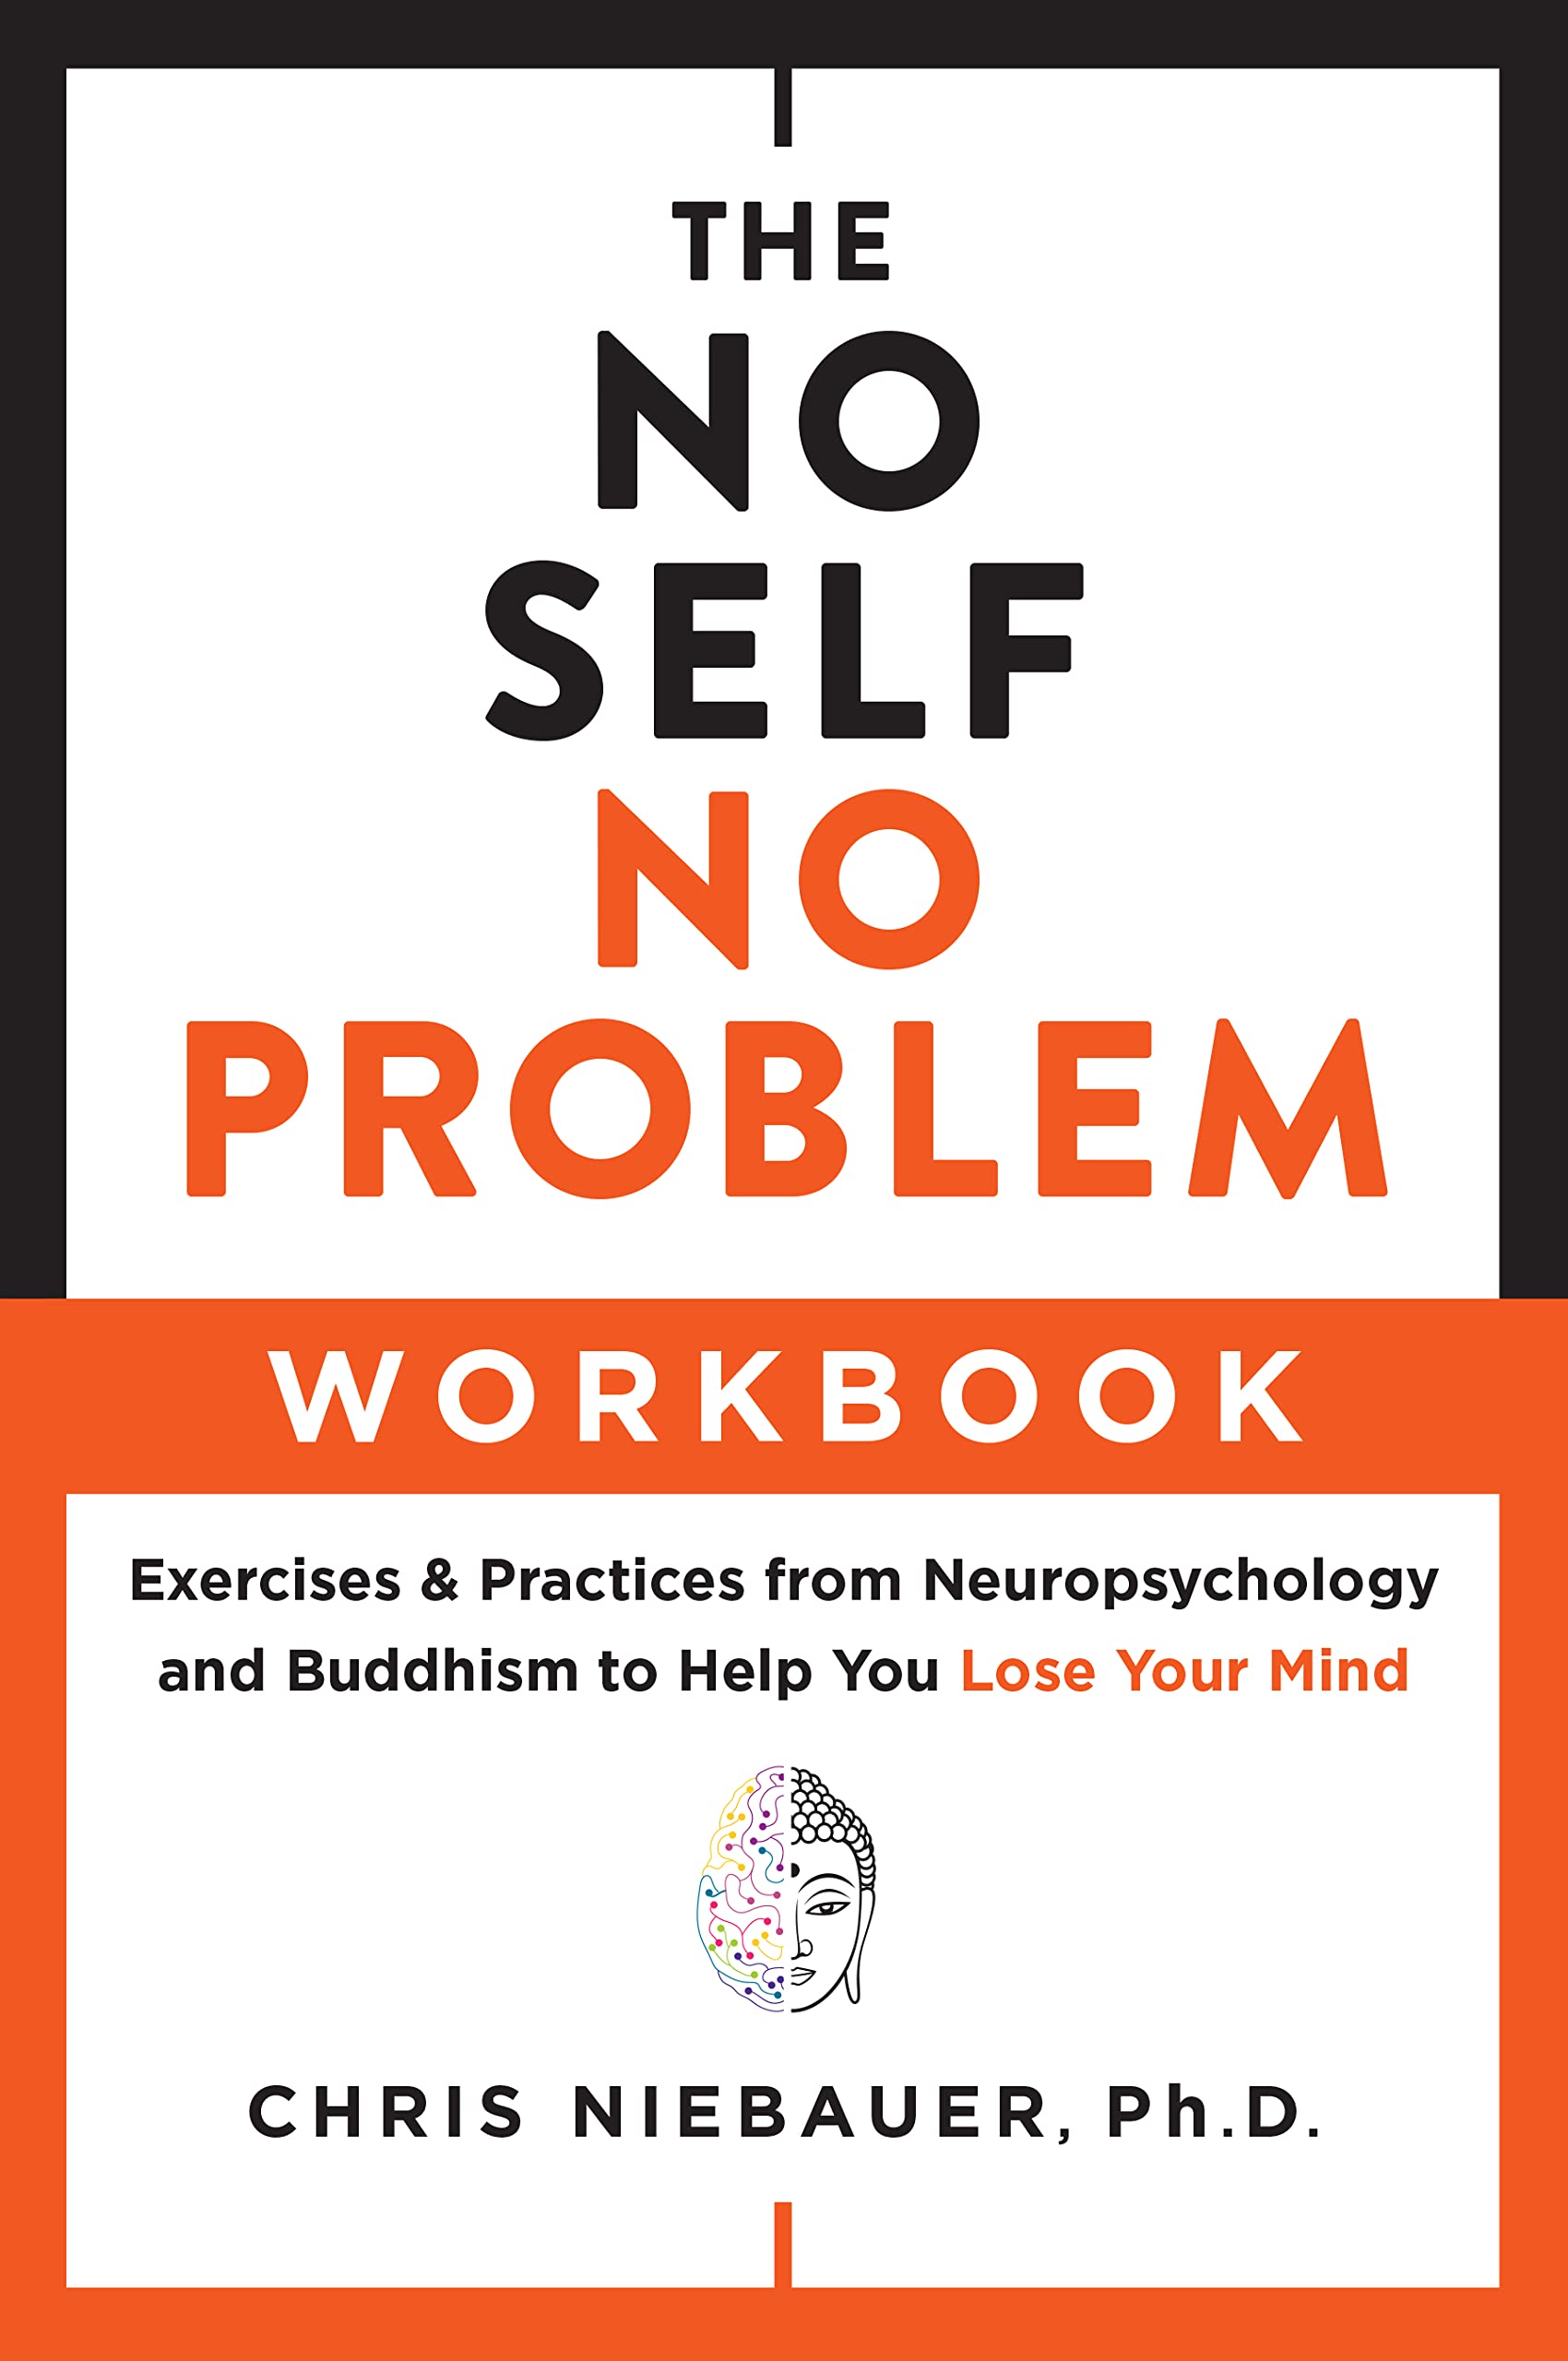 The No Self, No Problem Workbook: Exercises & Practices from Neuropsychology and Buddhism to Help You Lose Your Mind (The No Self Wisdom Series)